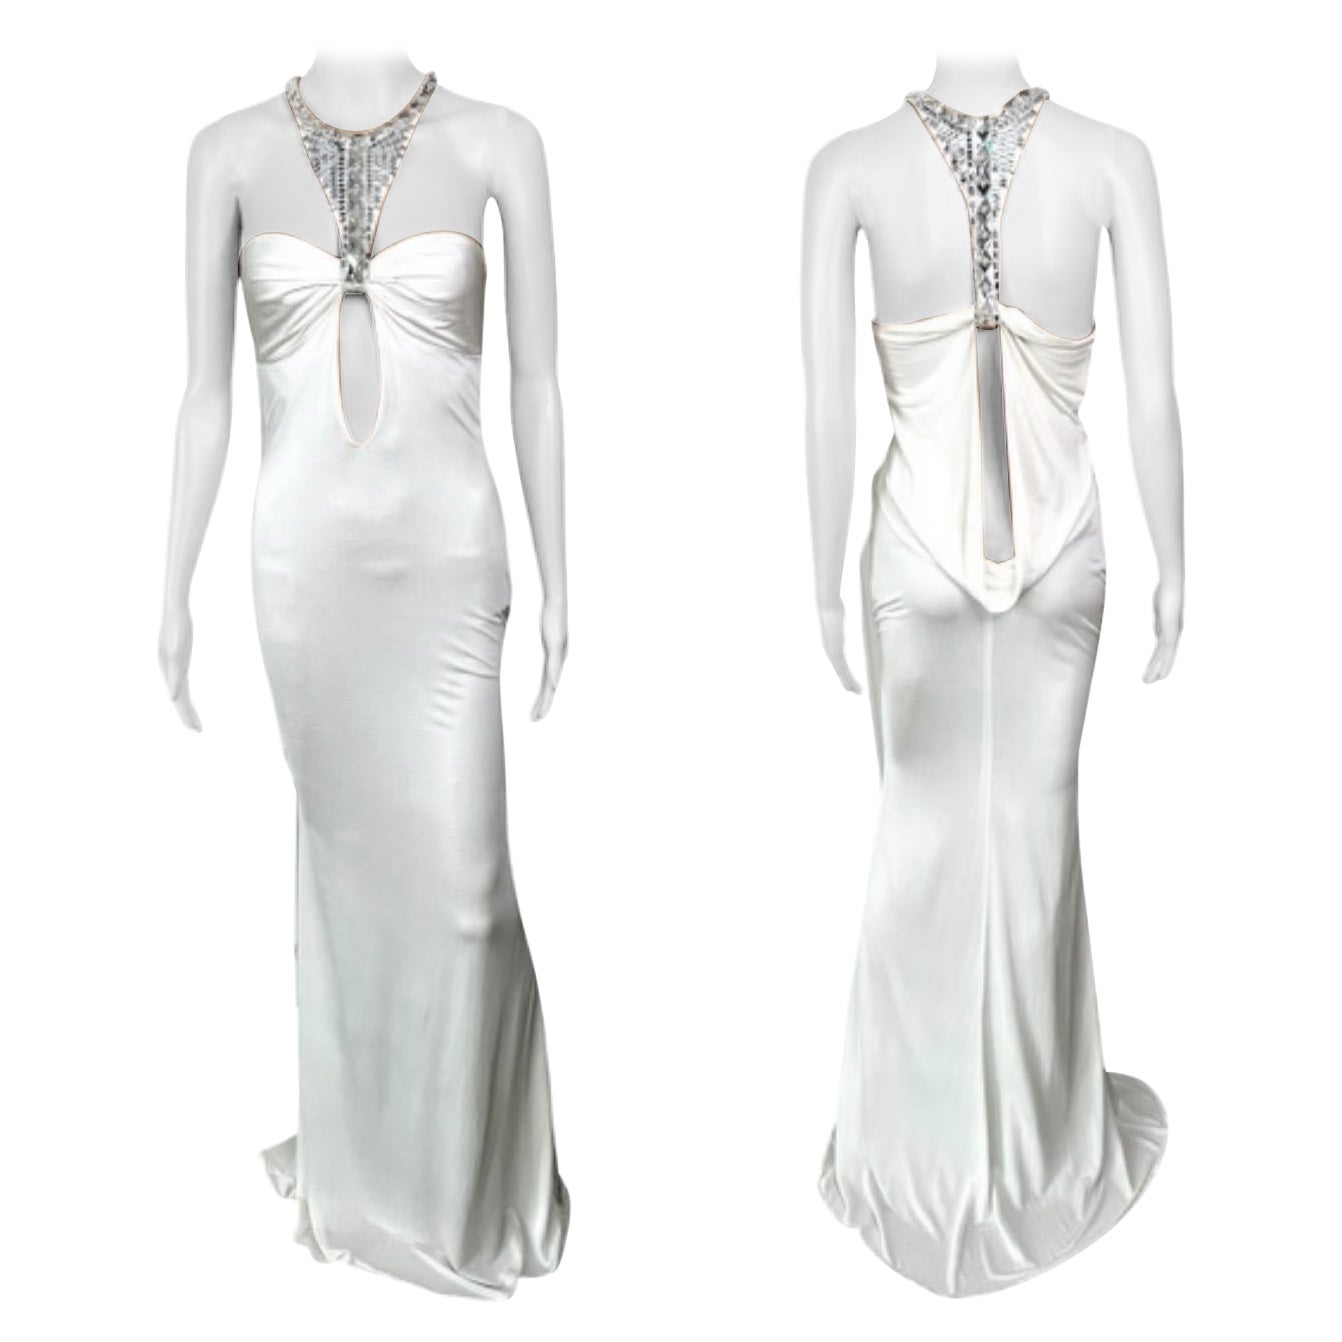 Tom Ford for Gucci F/W 2004 Embellished Plunging Cutout Ivory Evening Dress Gown For Sale